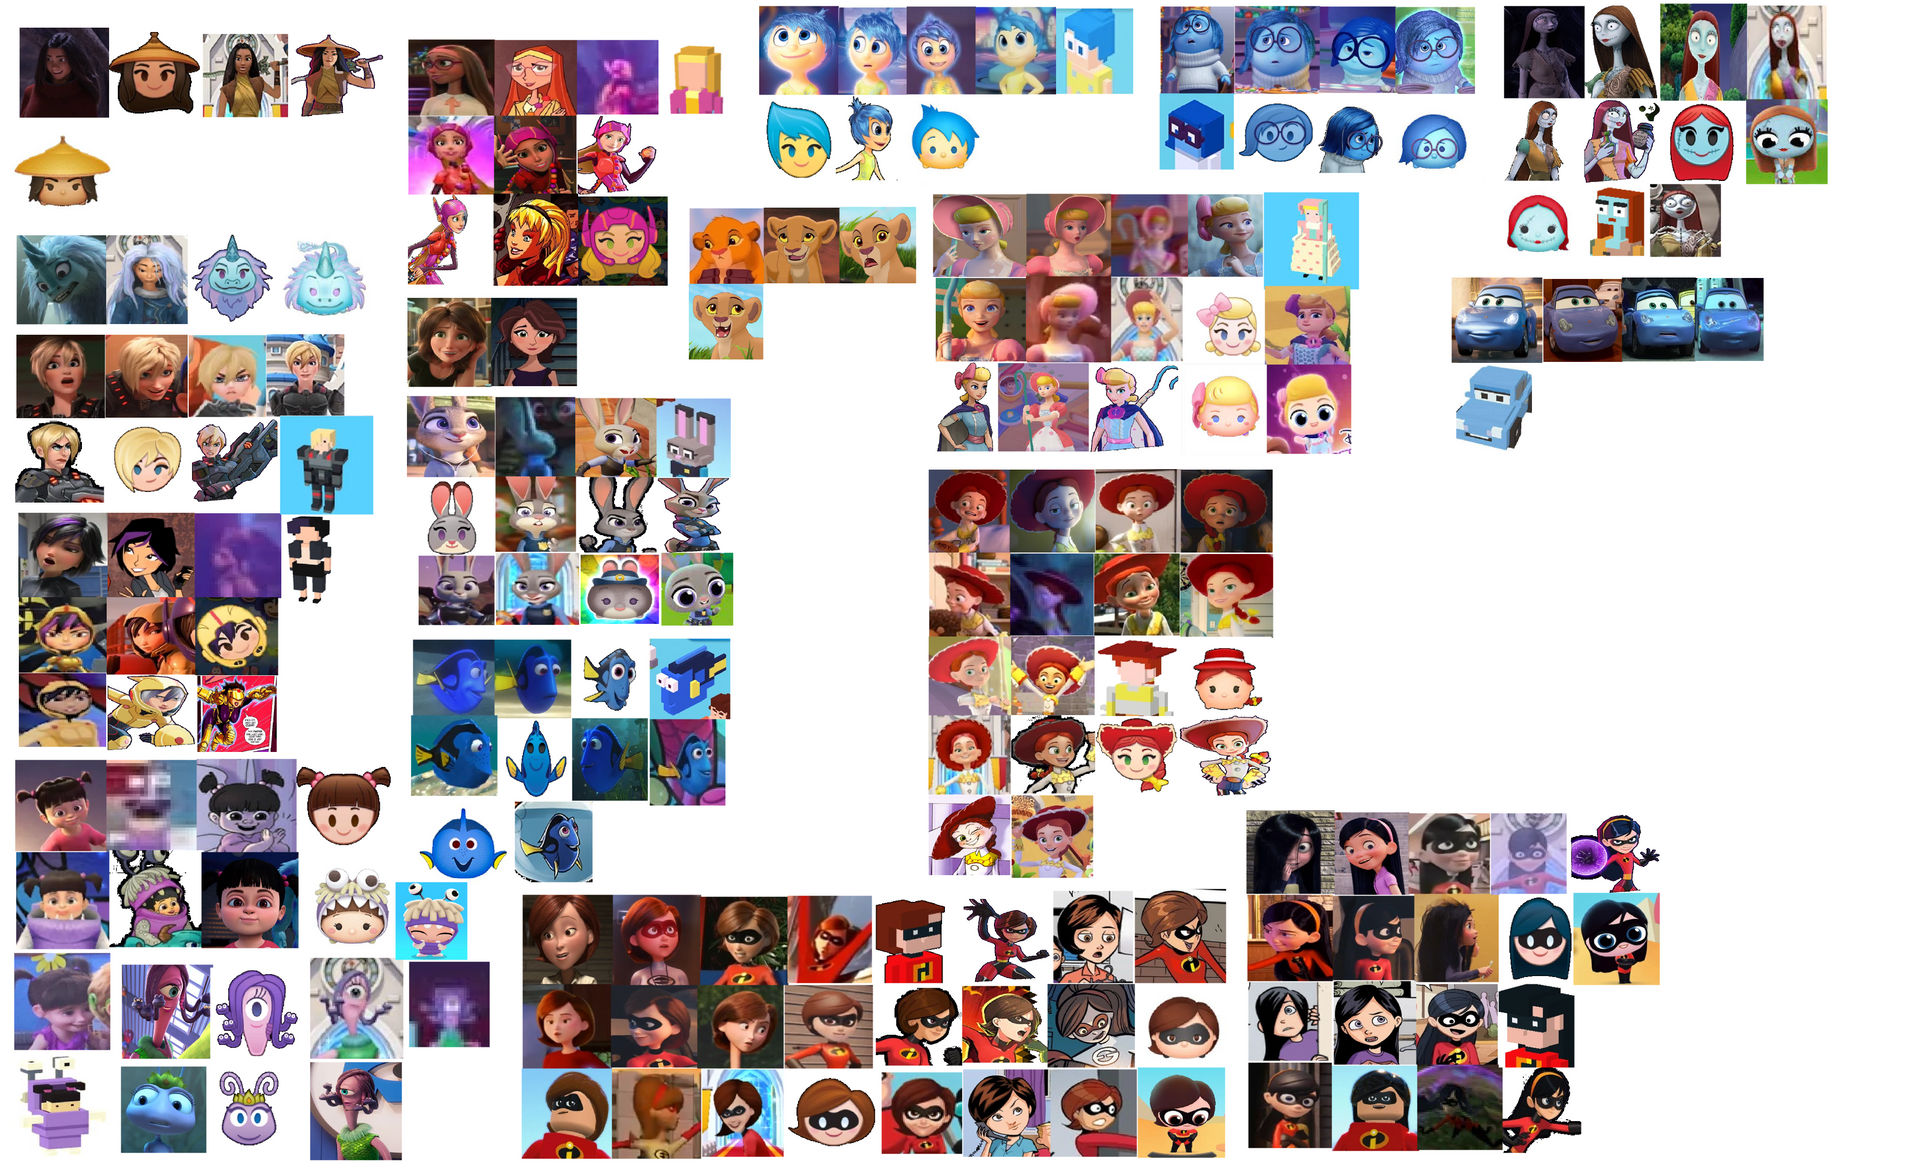 Disney And Pixar Heroines In Animated Media by Blossomgutz on DeviantArt